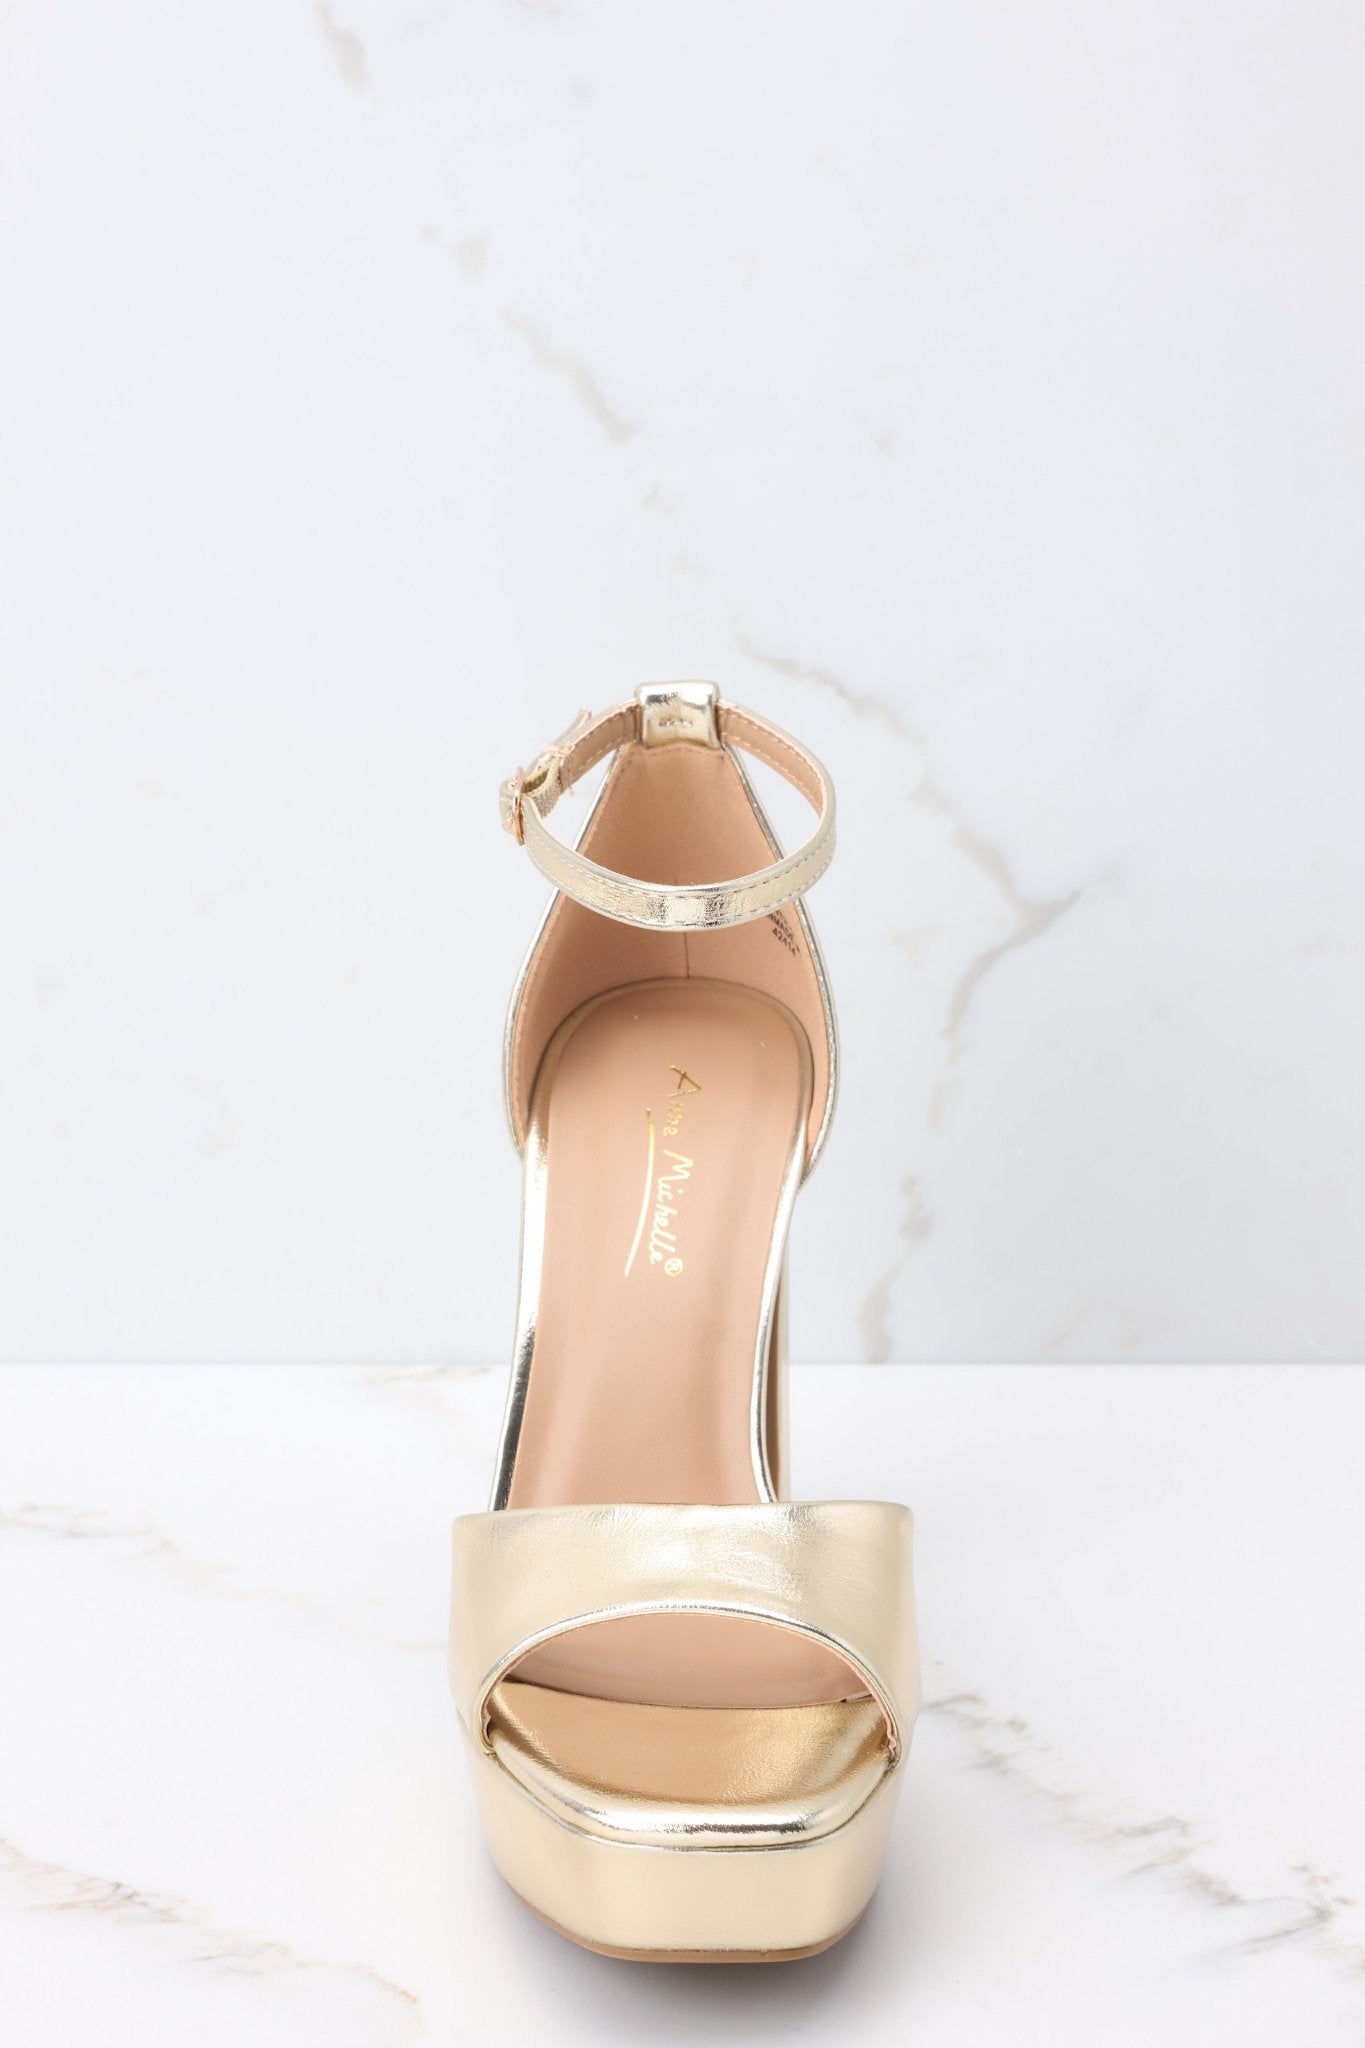 These champagne gold high heels are the perfect statement shoe for any  occasion. #nalebe #Stellaplatforms #champagneGold #highheels | Instagram